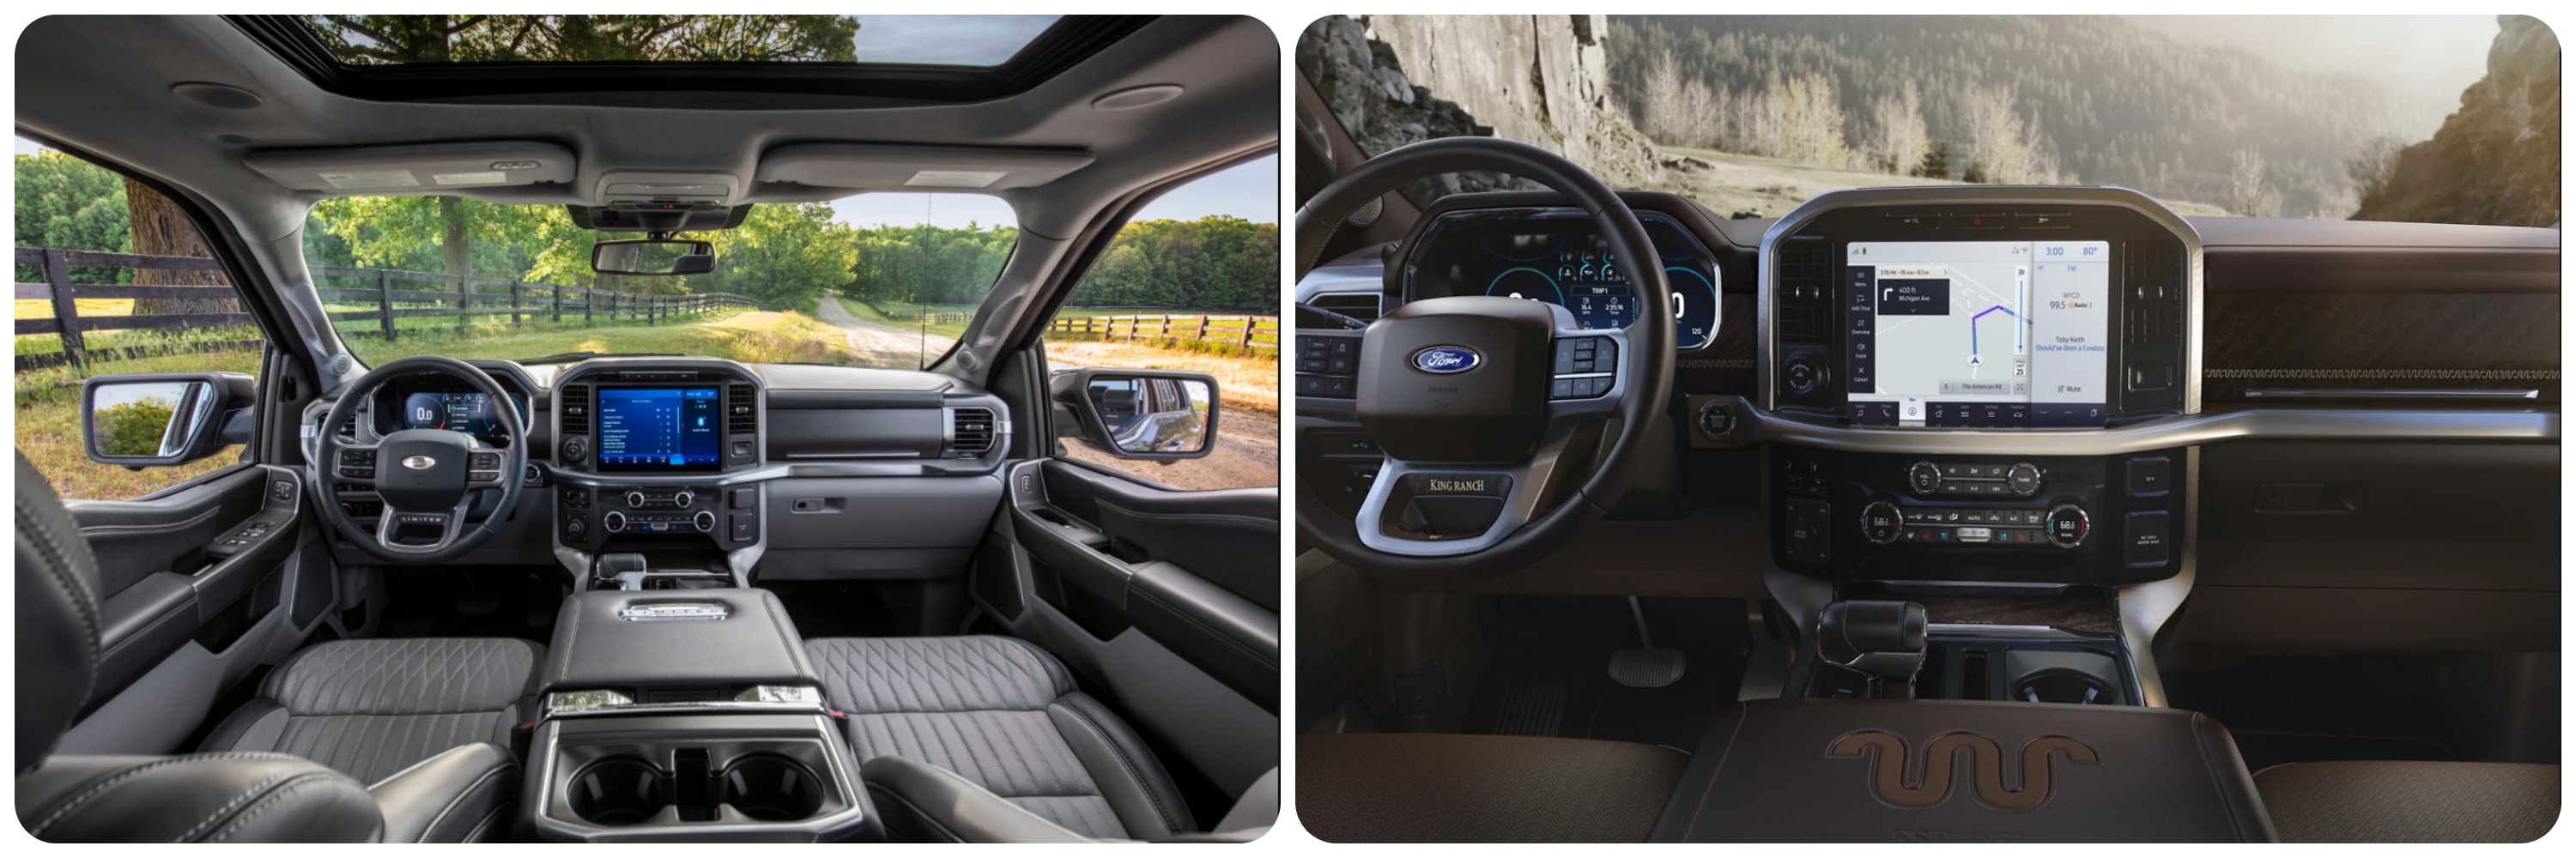 On the left is a view of the large gray trimmed cabin looking out the windshield of the 2022 Ford F-150 with digital dash, large infotainment screen and a center console with two drink holders. On the right is a similar view of the interior cabin of a brown-trimmed 2021 Ford F-150 with digital dash, large infotainment touchscreen interface, and 2 cup holders in a large center console